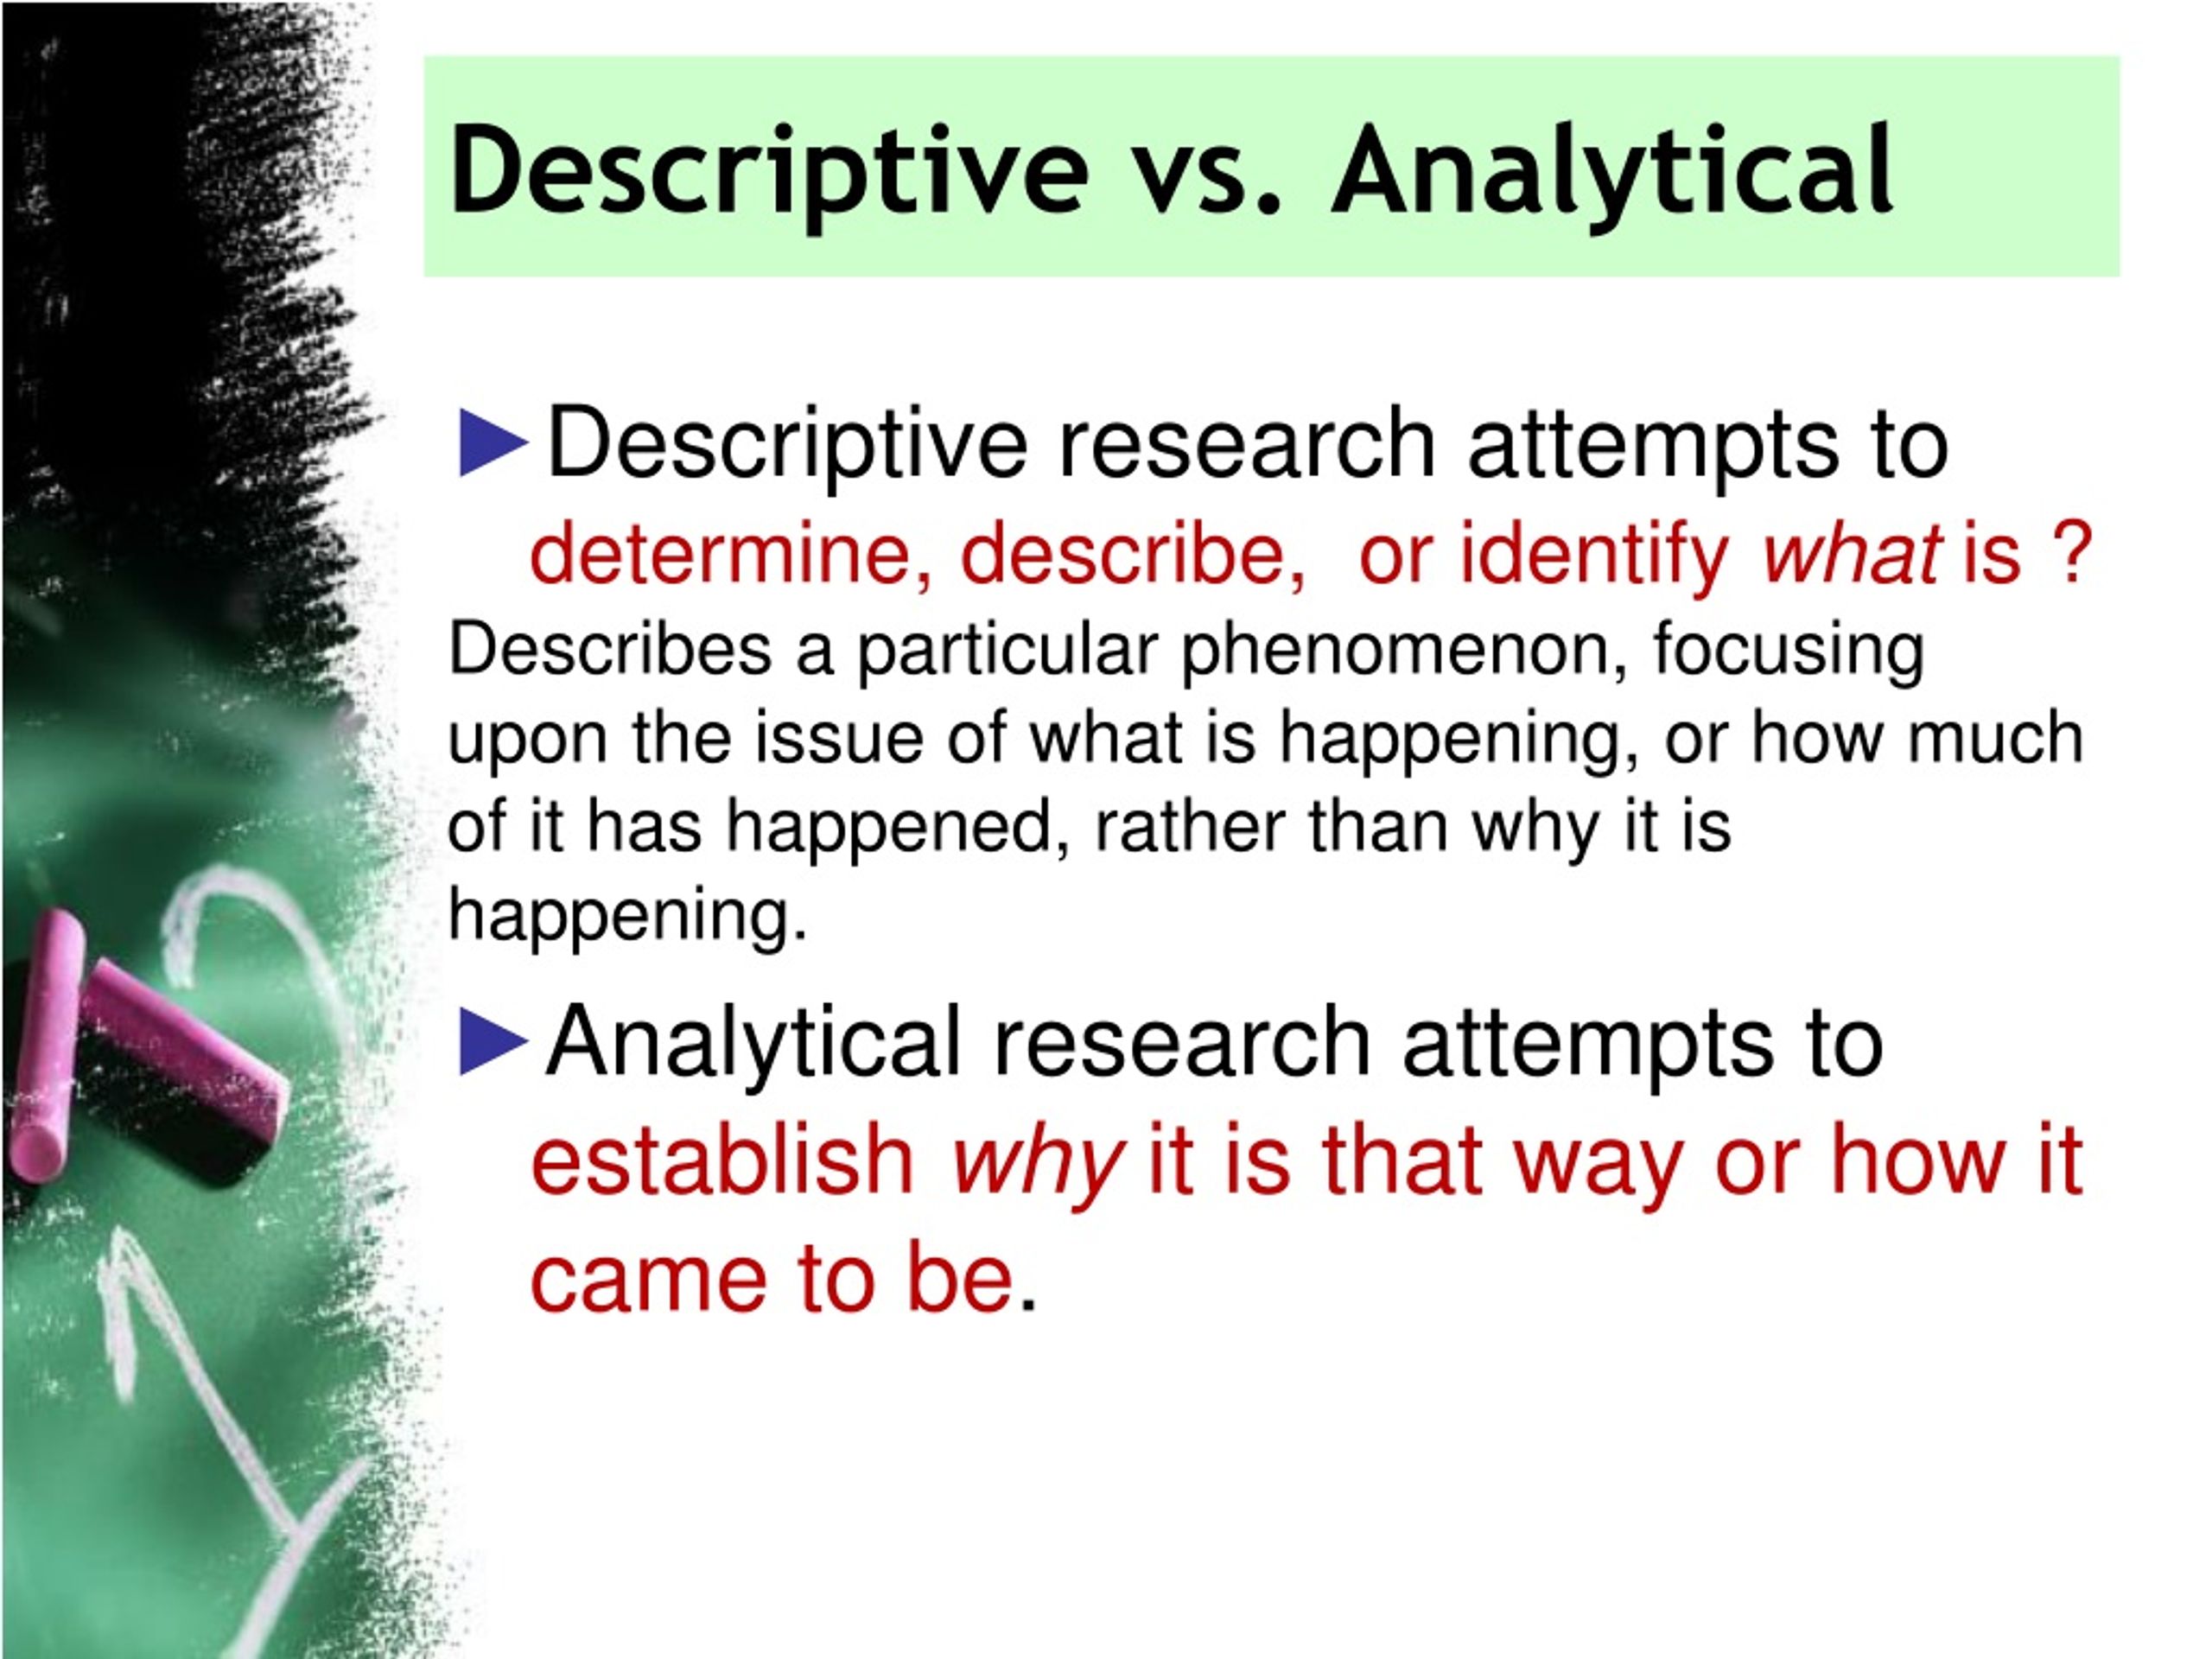 types of research descriptive vs analytical